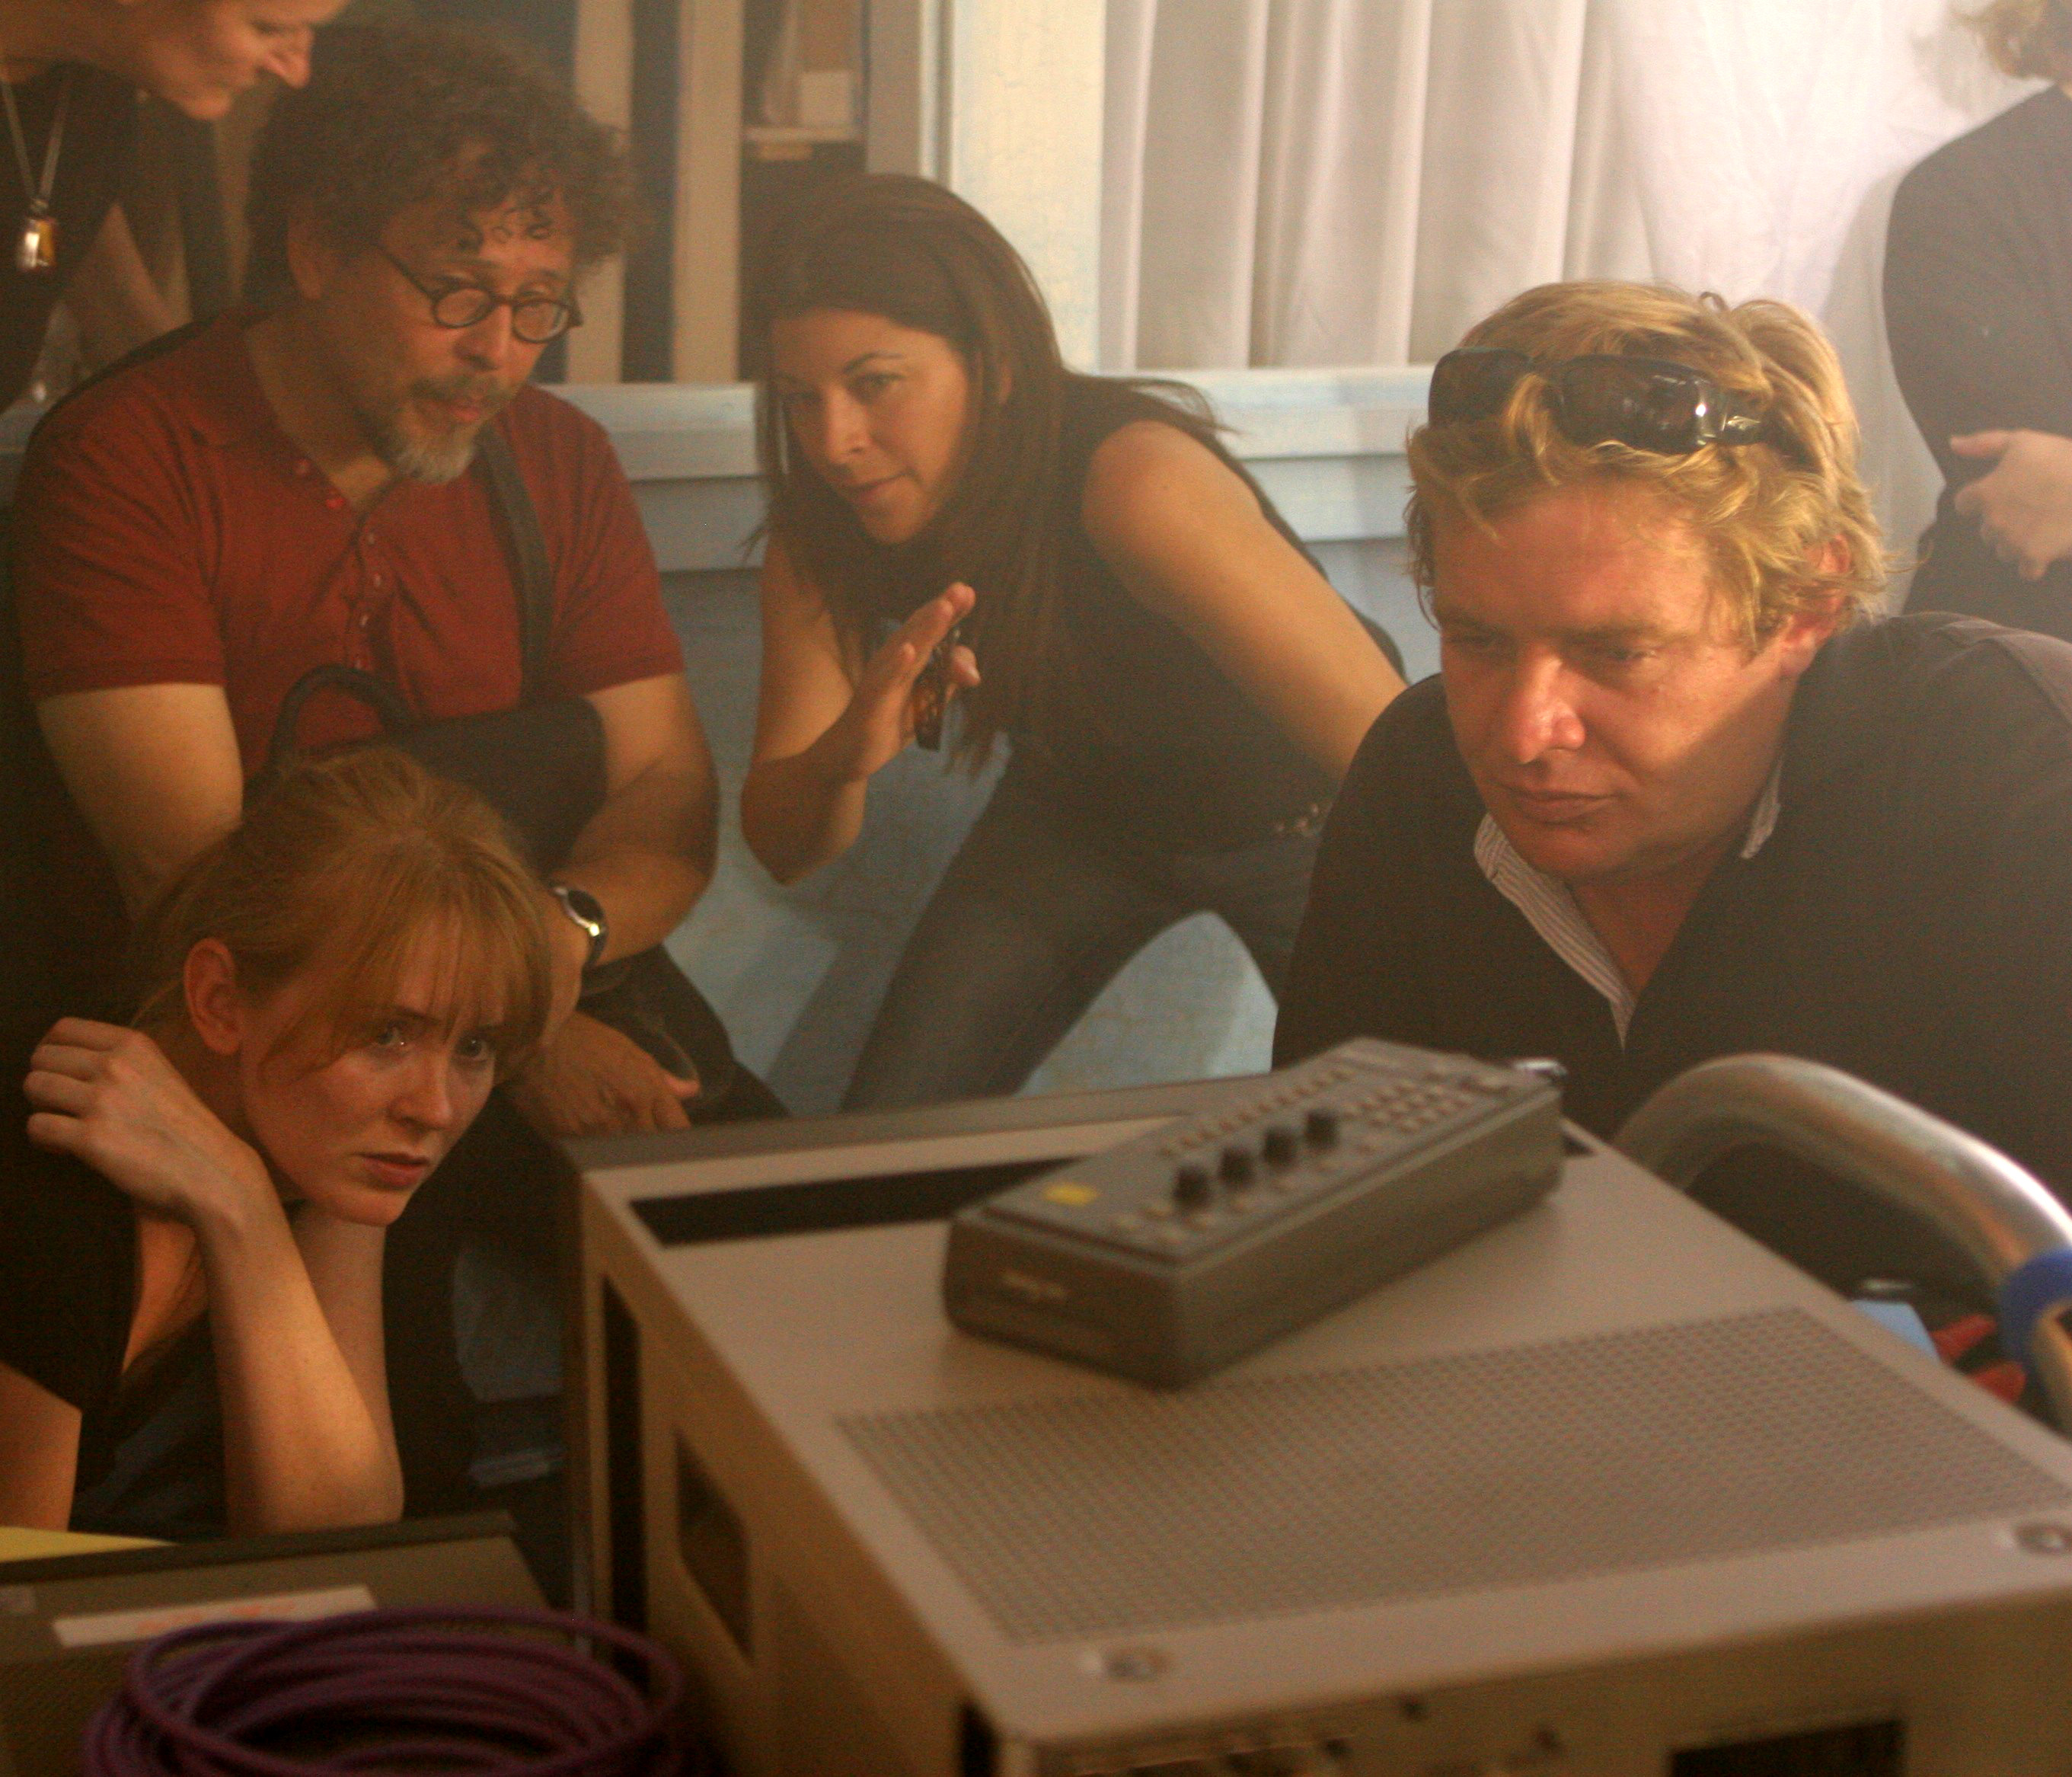 On set of The Winged Man (2008) Writer - Jose Rivera; Producer - Camillia Monet; Director of Photography - Tim Hudson